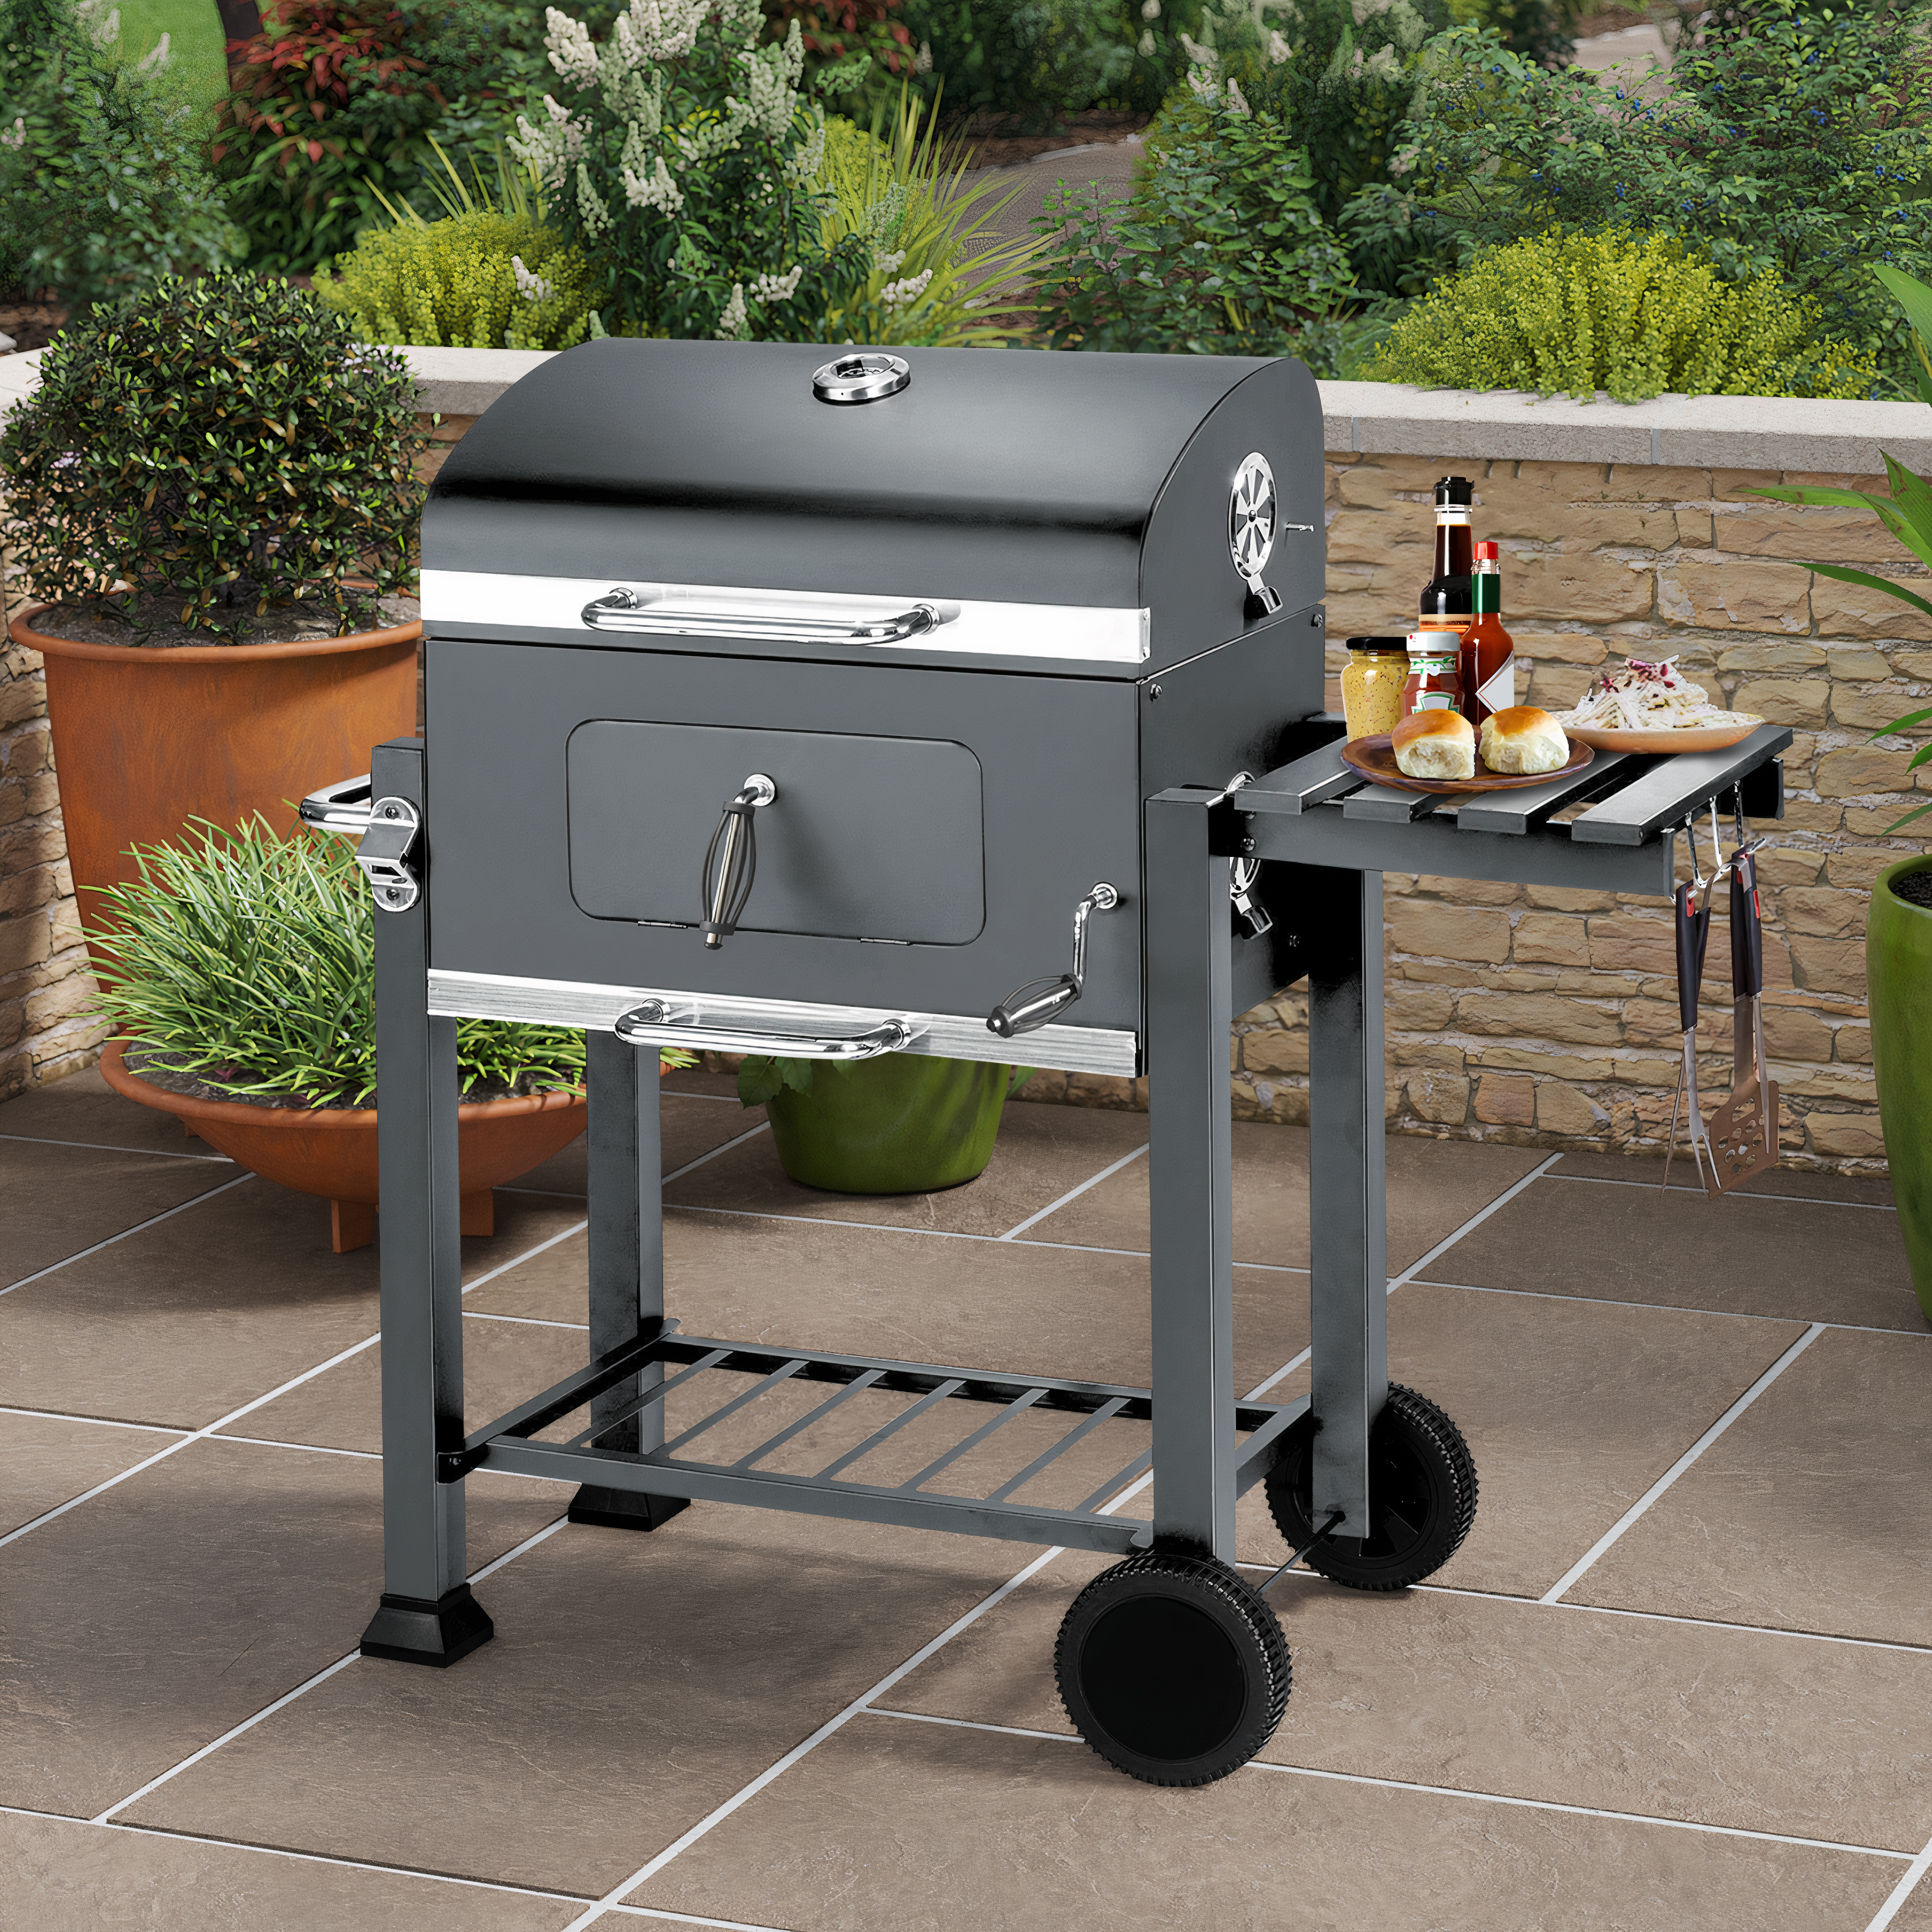 Portable Charcoal BBQ Smoker Grill | BillyOh